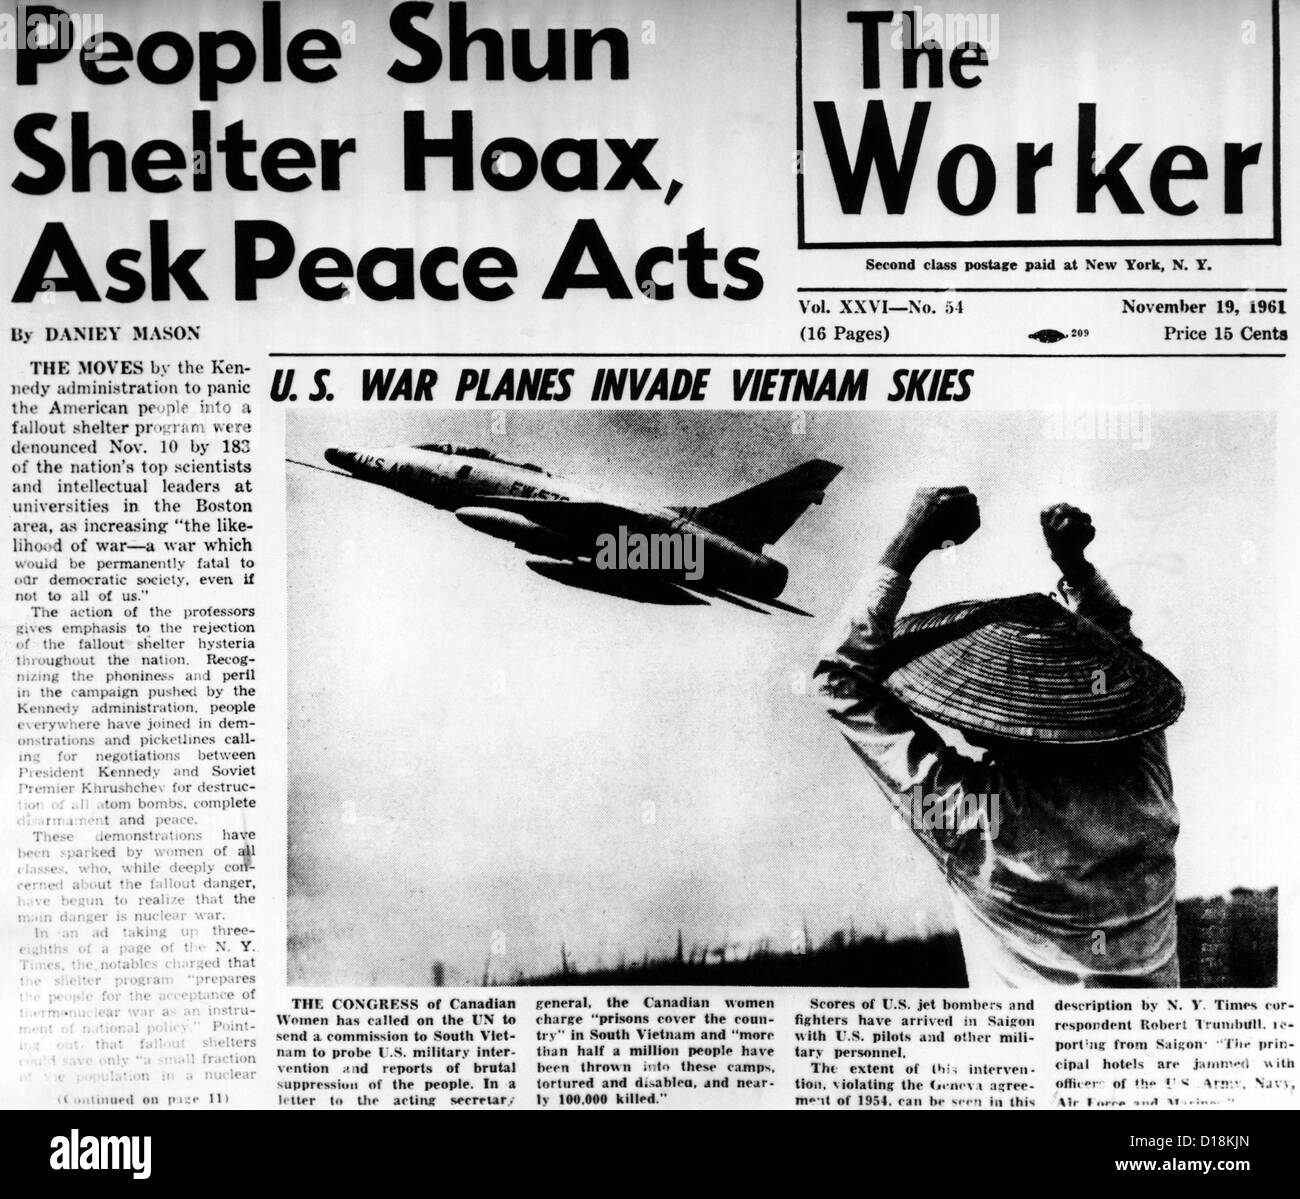 US Planes Invade Vietnam Skies. An obviously manipulated composite photograph on the front page of the Daily Worker, the Stock Photo